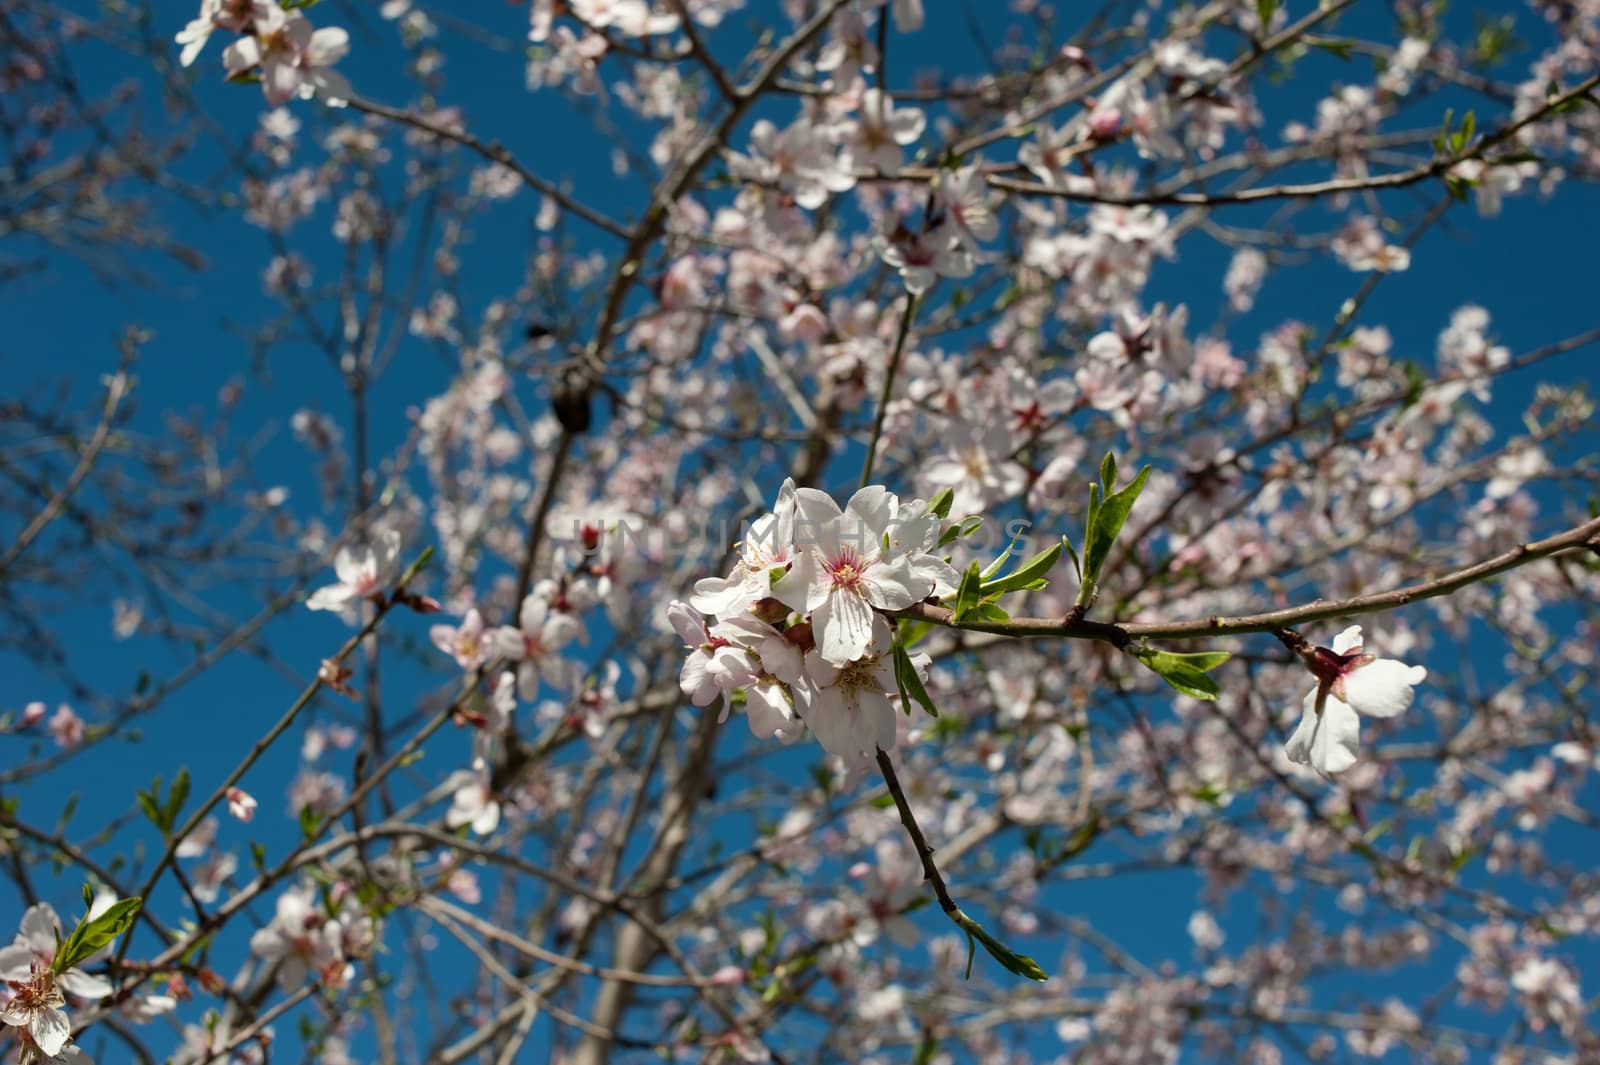 Almond tree flowering in late winter, announcing srping